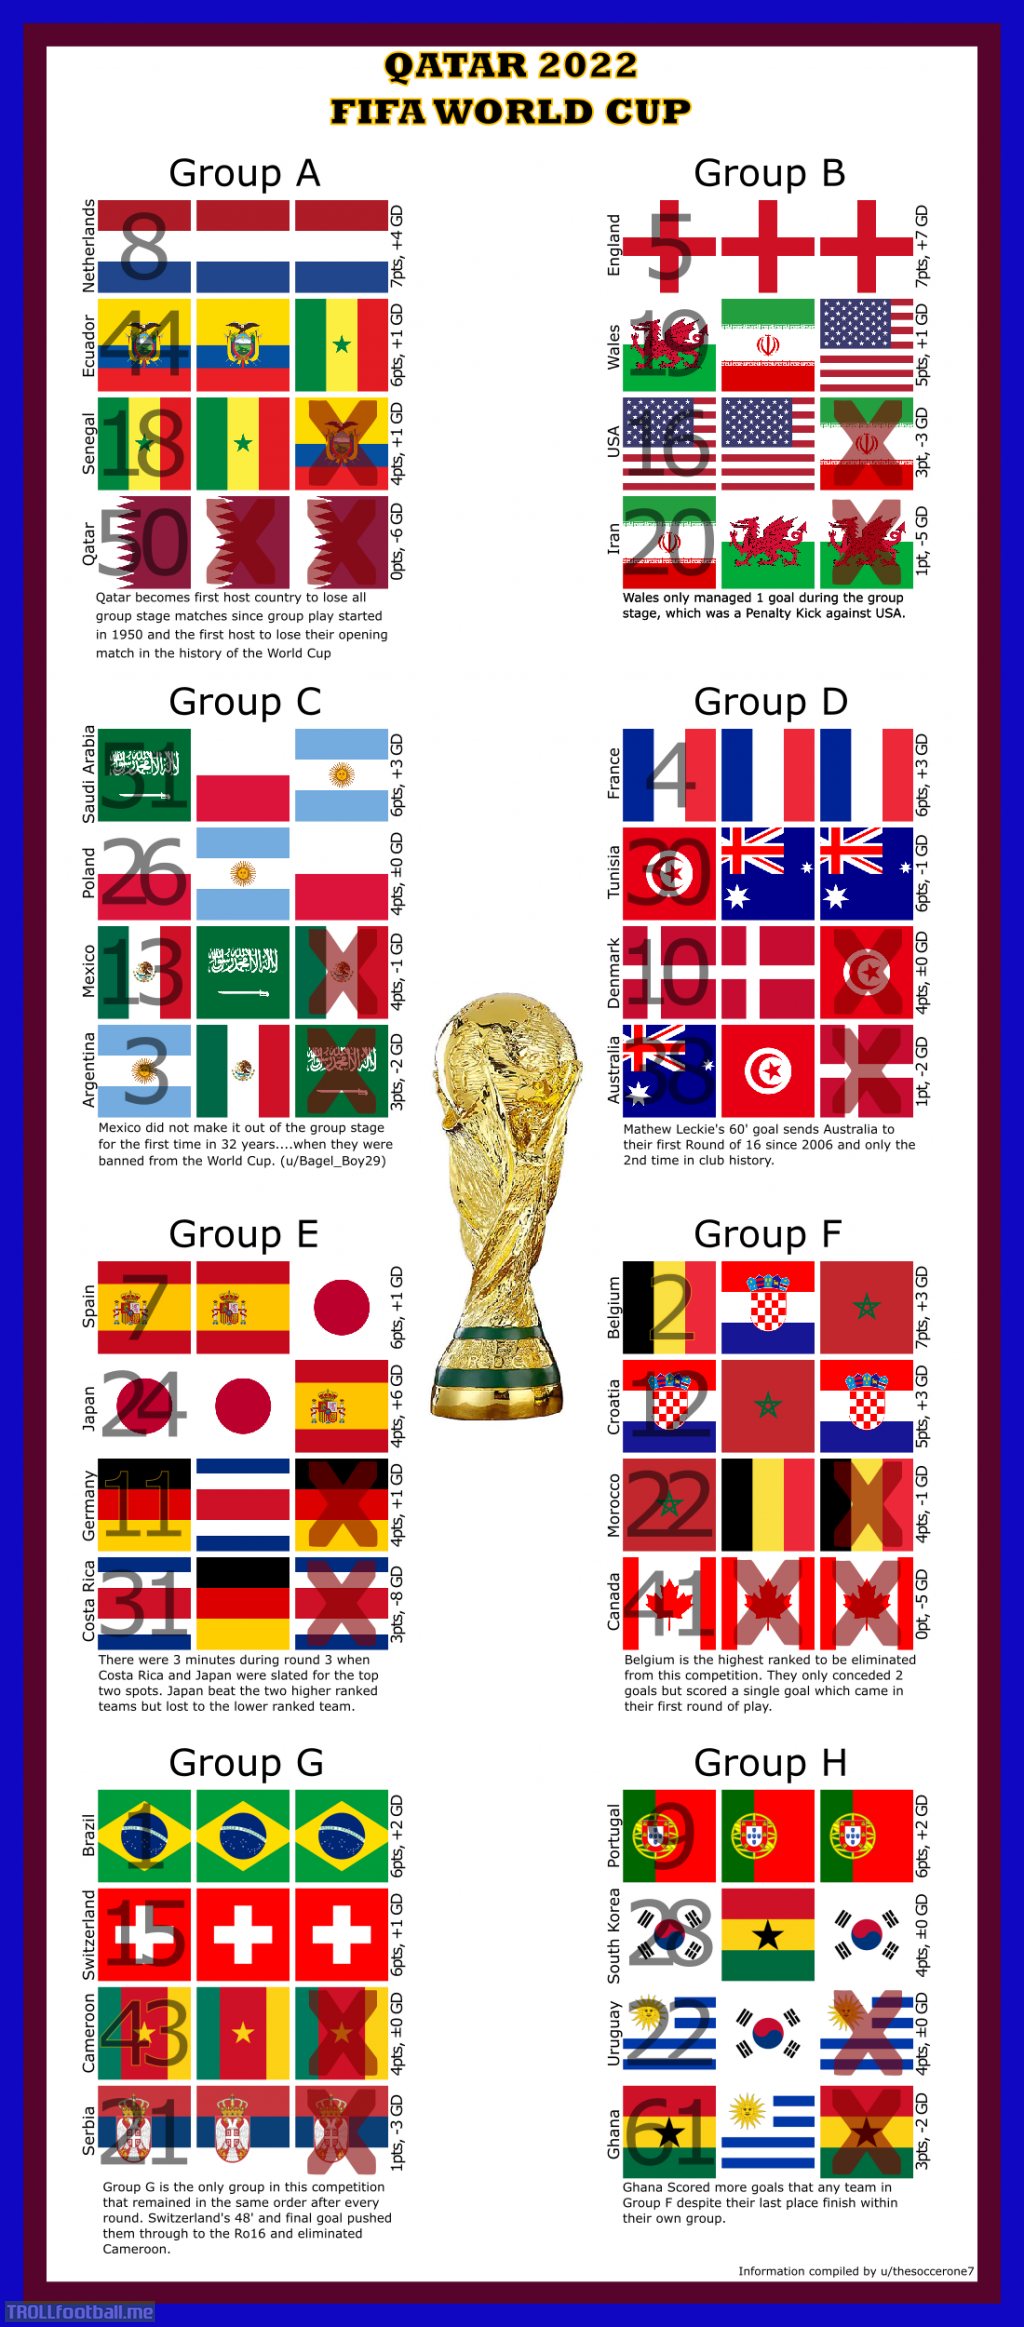 Progression of standings through Group Stage and FIFA Rankings